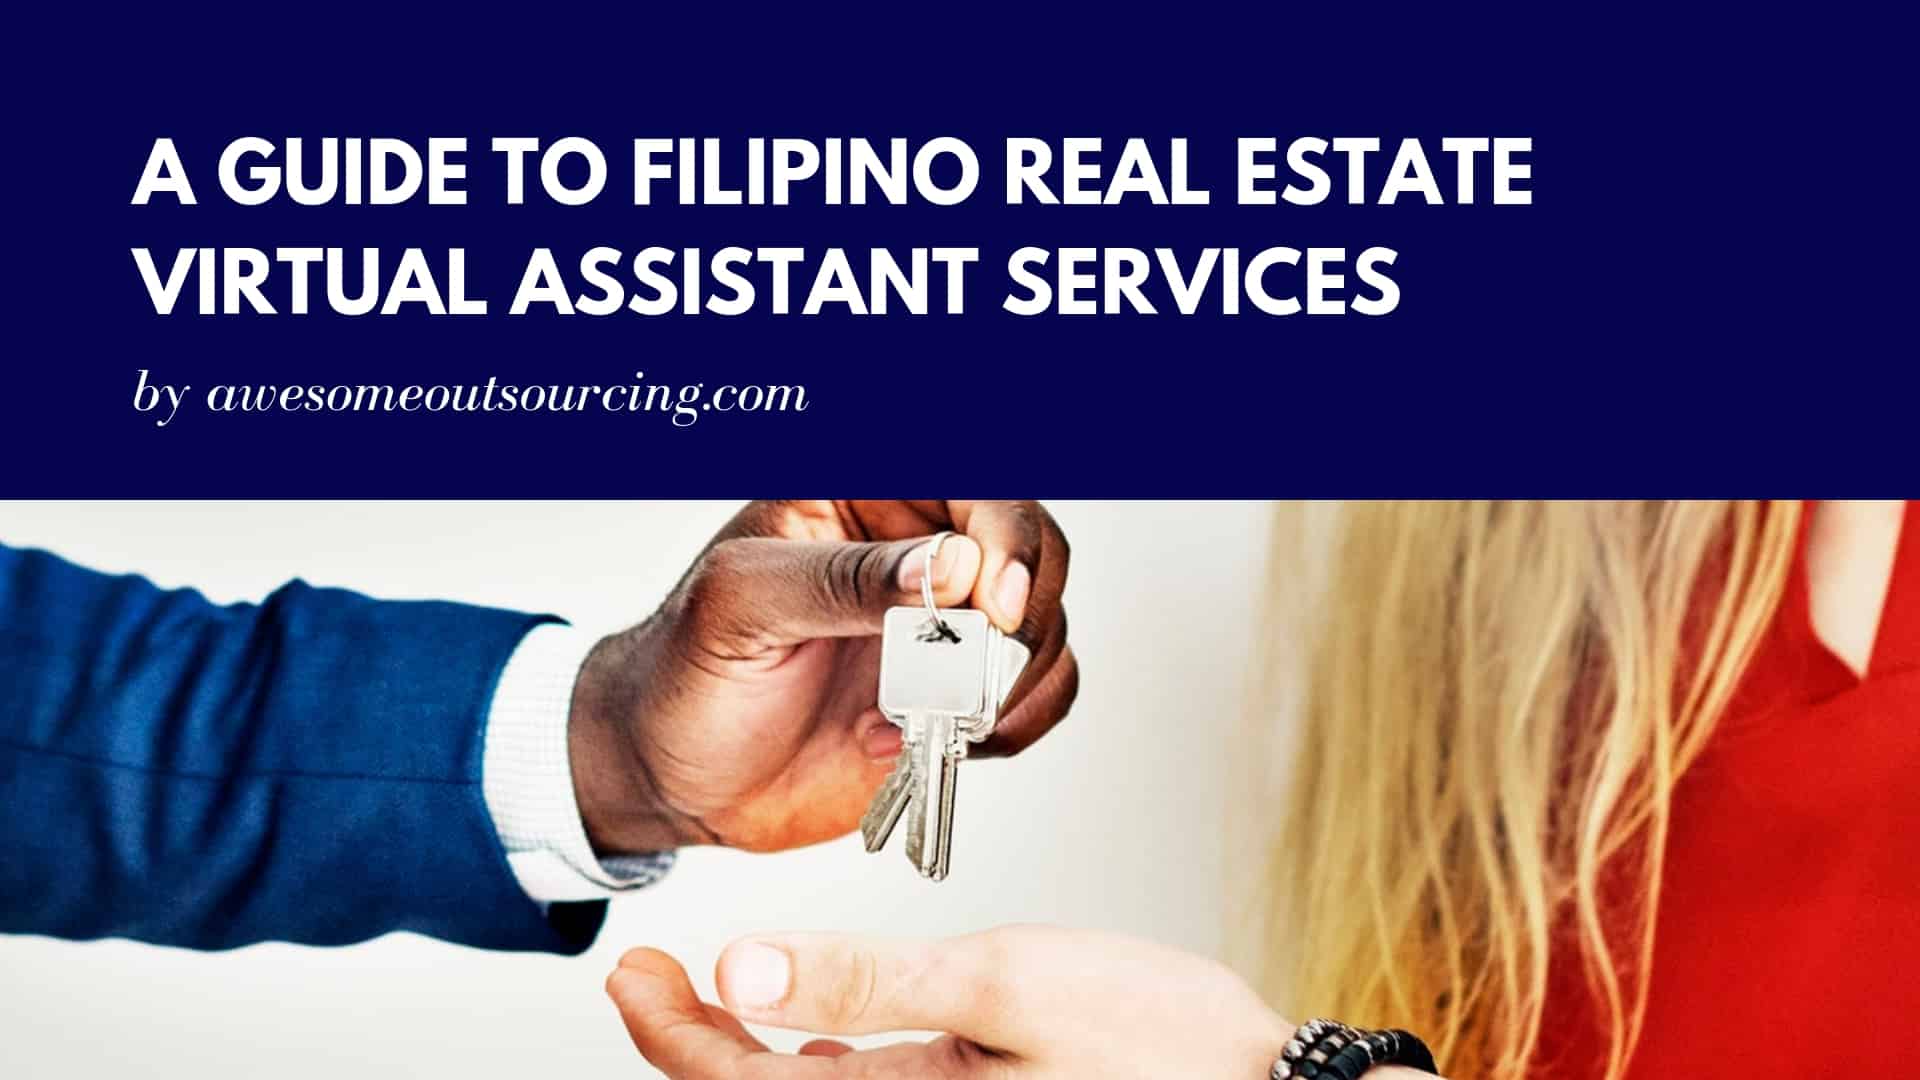 A Guide to Filipino Real Estate Virtual Assistant Services